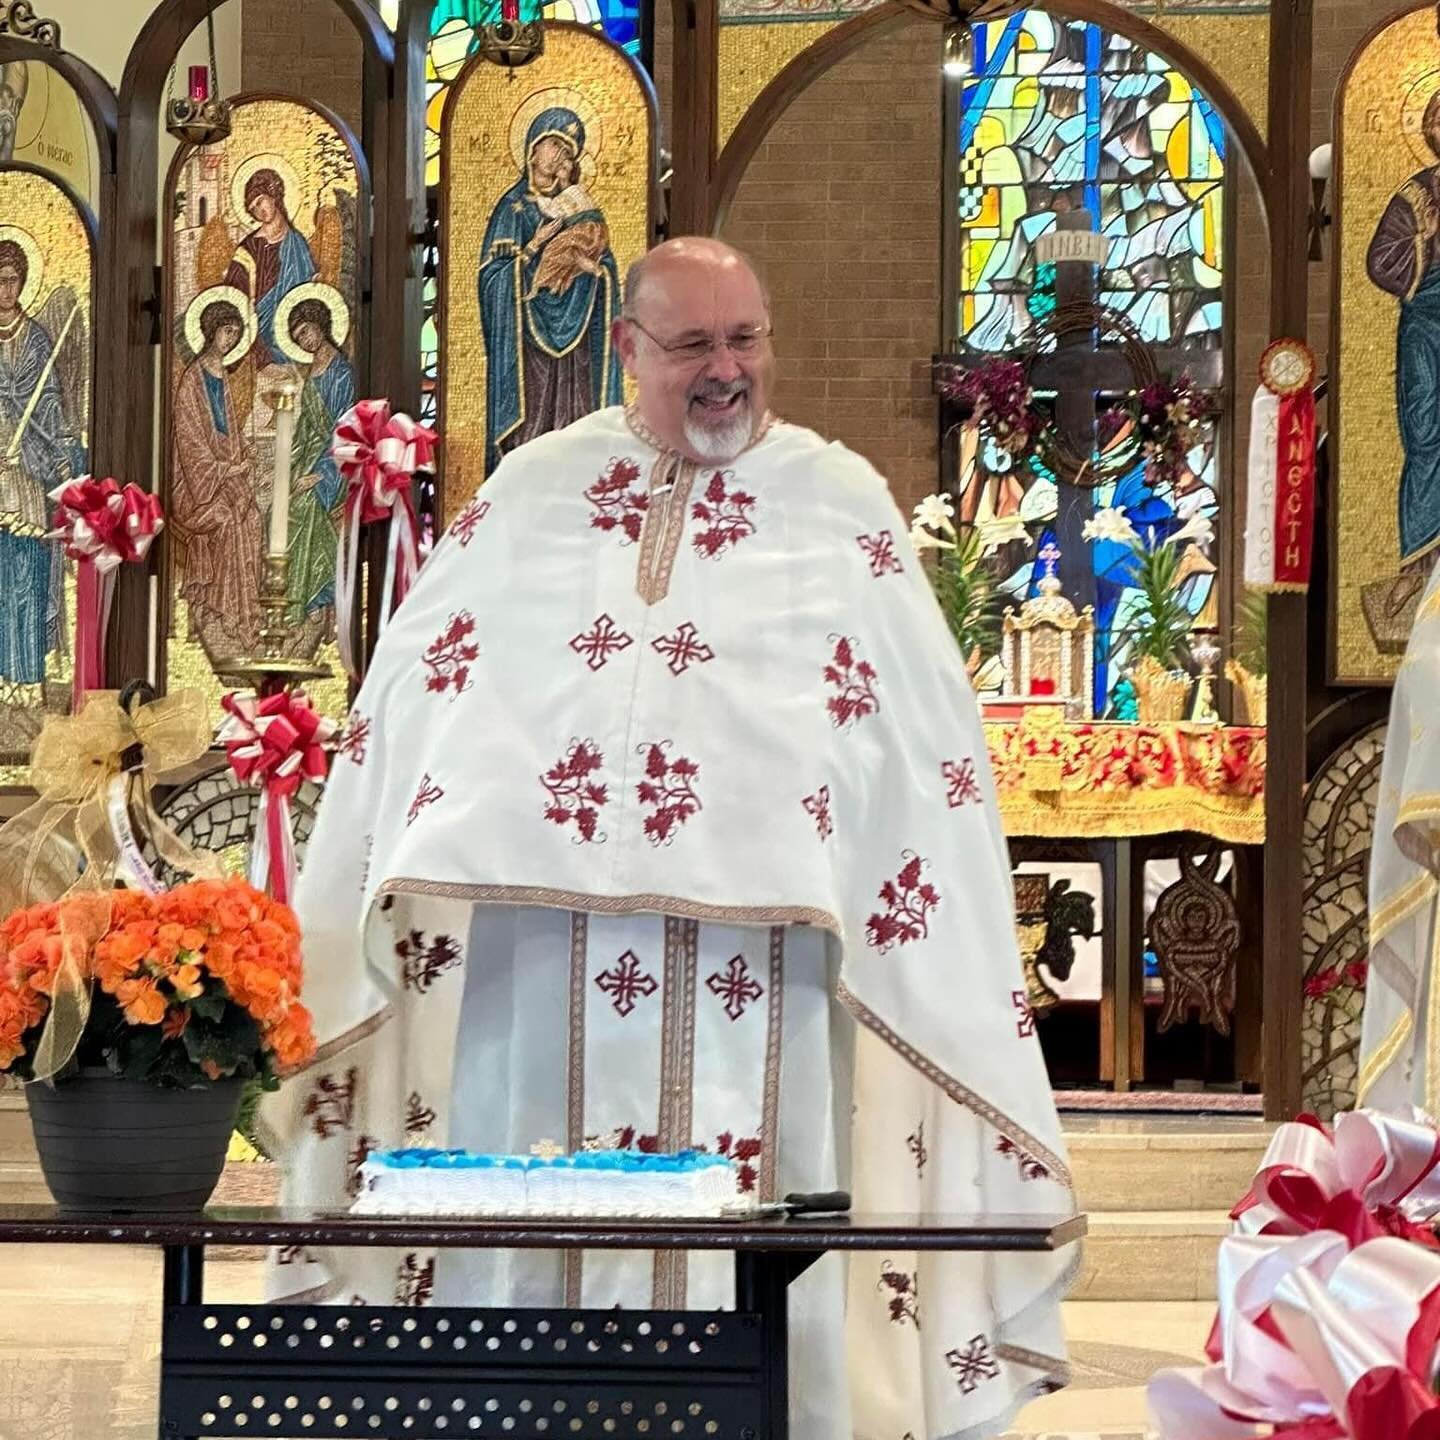 Today, Fr. Nick marked the 40th anniversary of his ordination to the Holy Priesthood. He was ordained at the St. Sophia Greek Orthodox Church in New London, Connecticut by the then, Bishop Methodios of Boston (now Metropolitan Methodios of Boston). 
